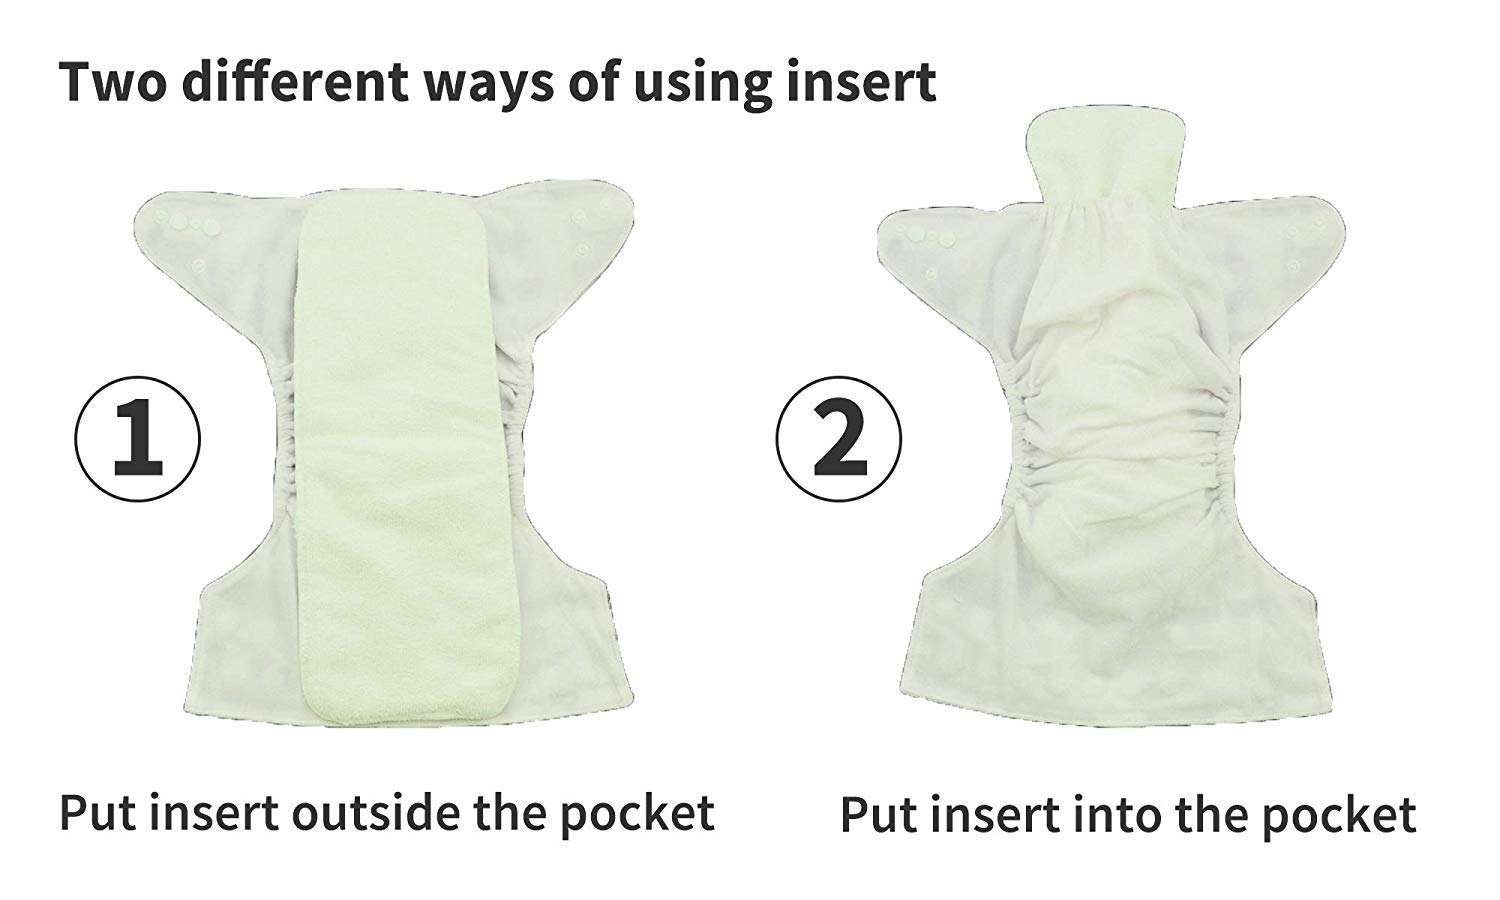 pocket cloth diapers